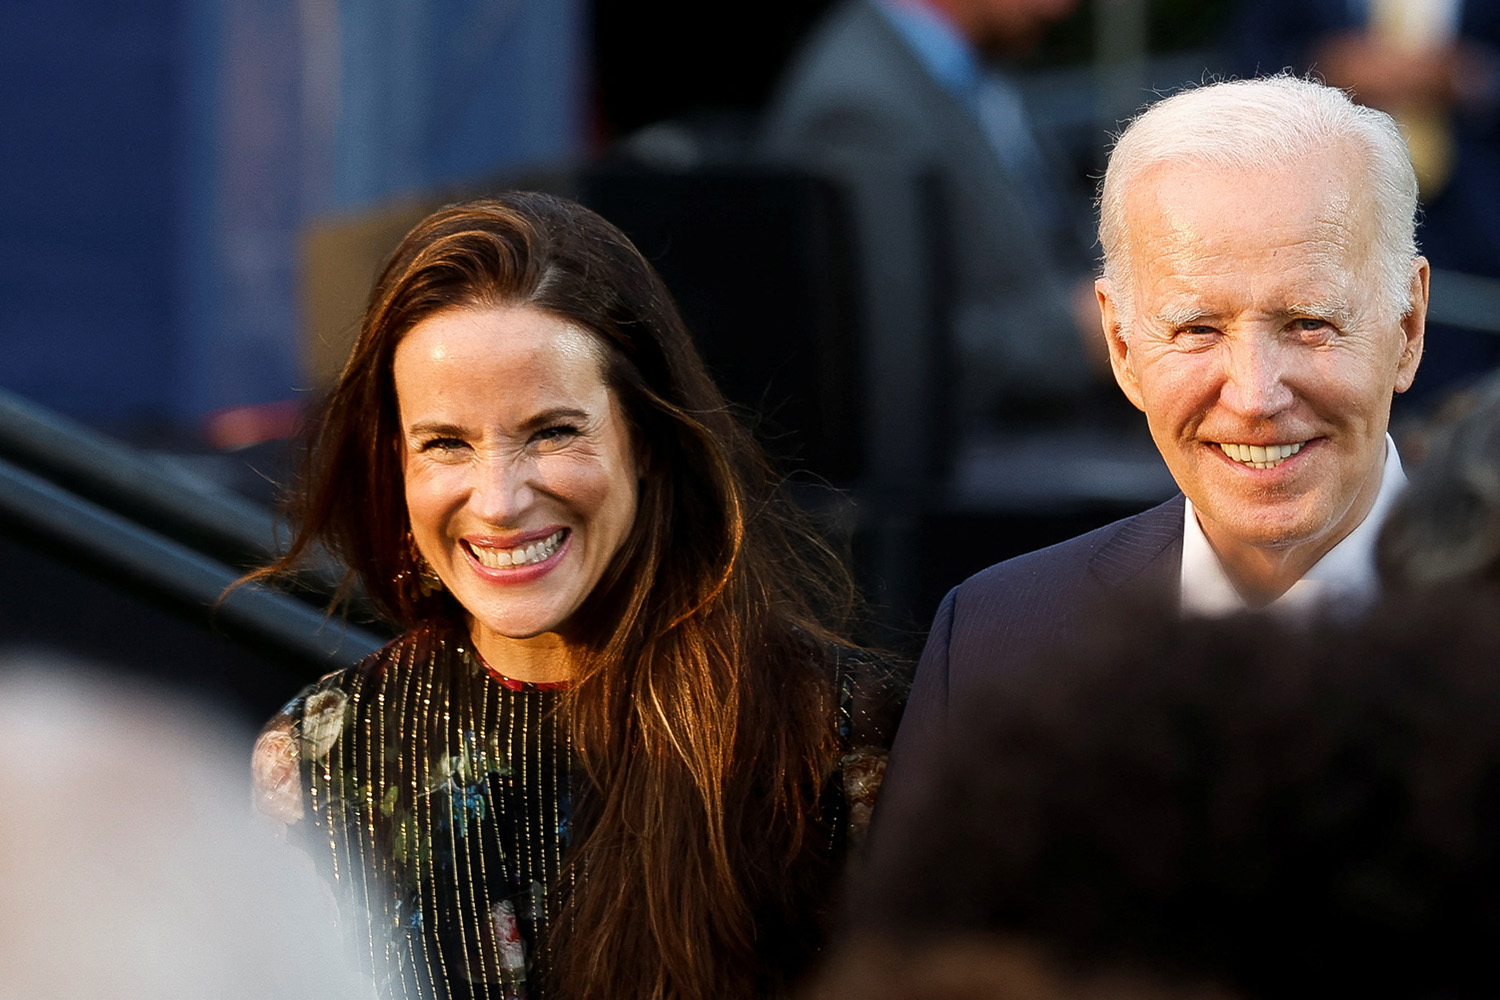 U.S. President Biden hosts a Juneteenth concert at the White House in Washington